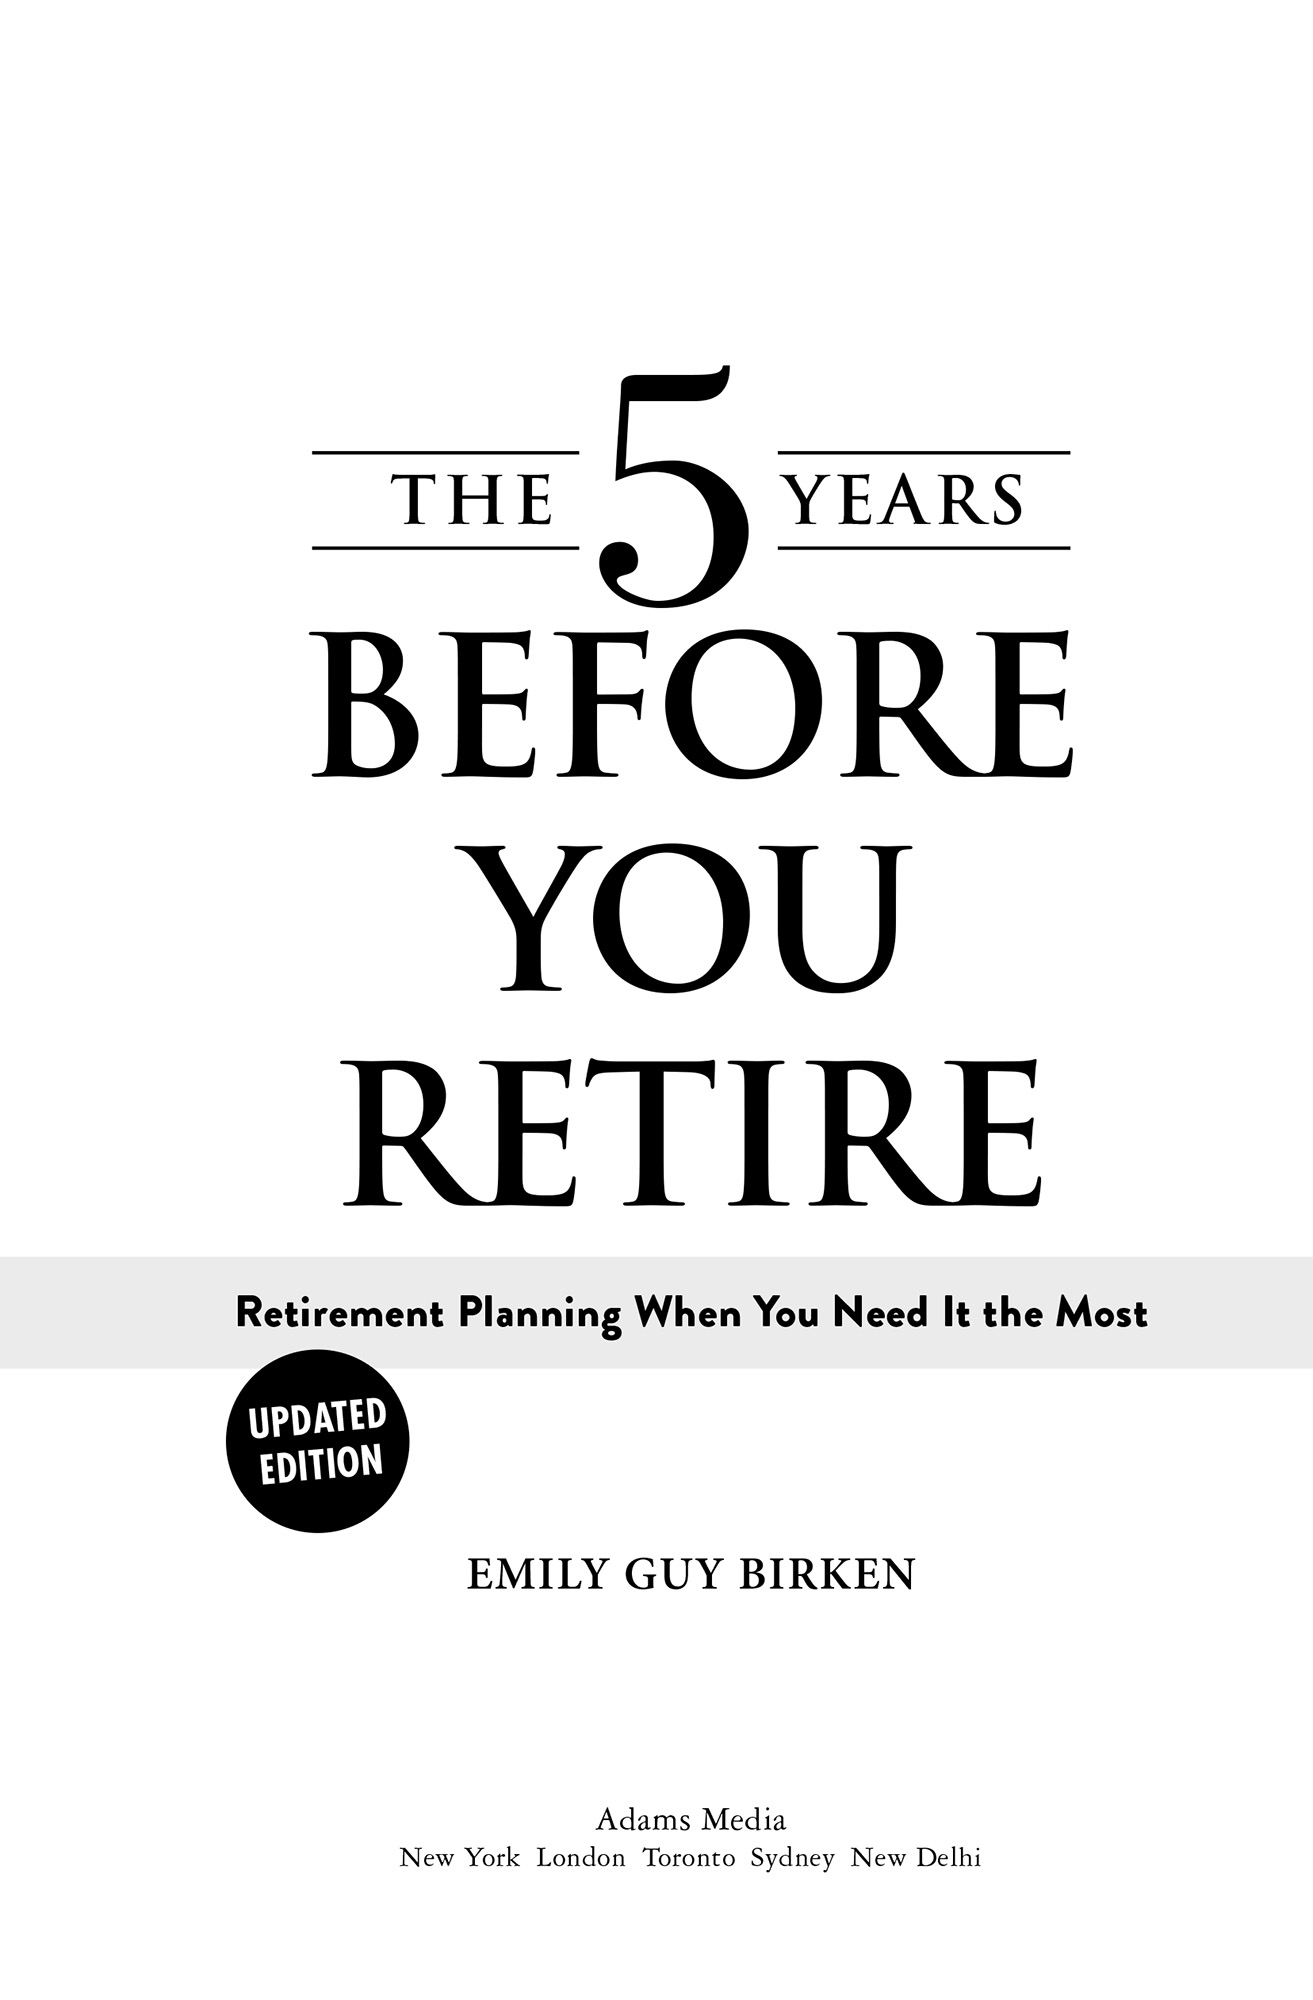 The 5 Years Before You Retire Updated Edition Retirement Planning When You Need It the Most - image 2